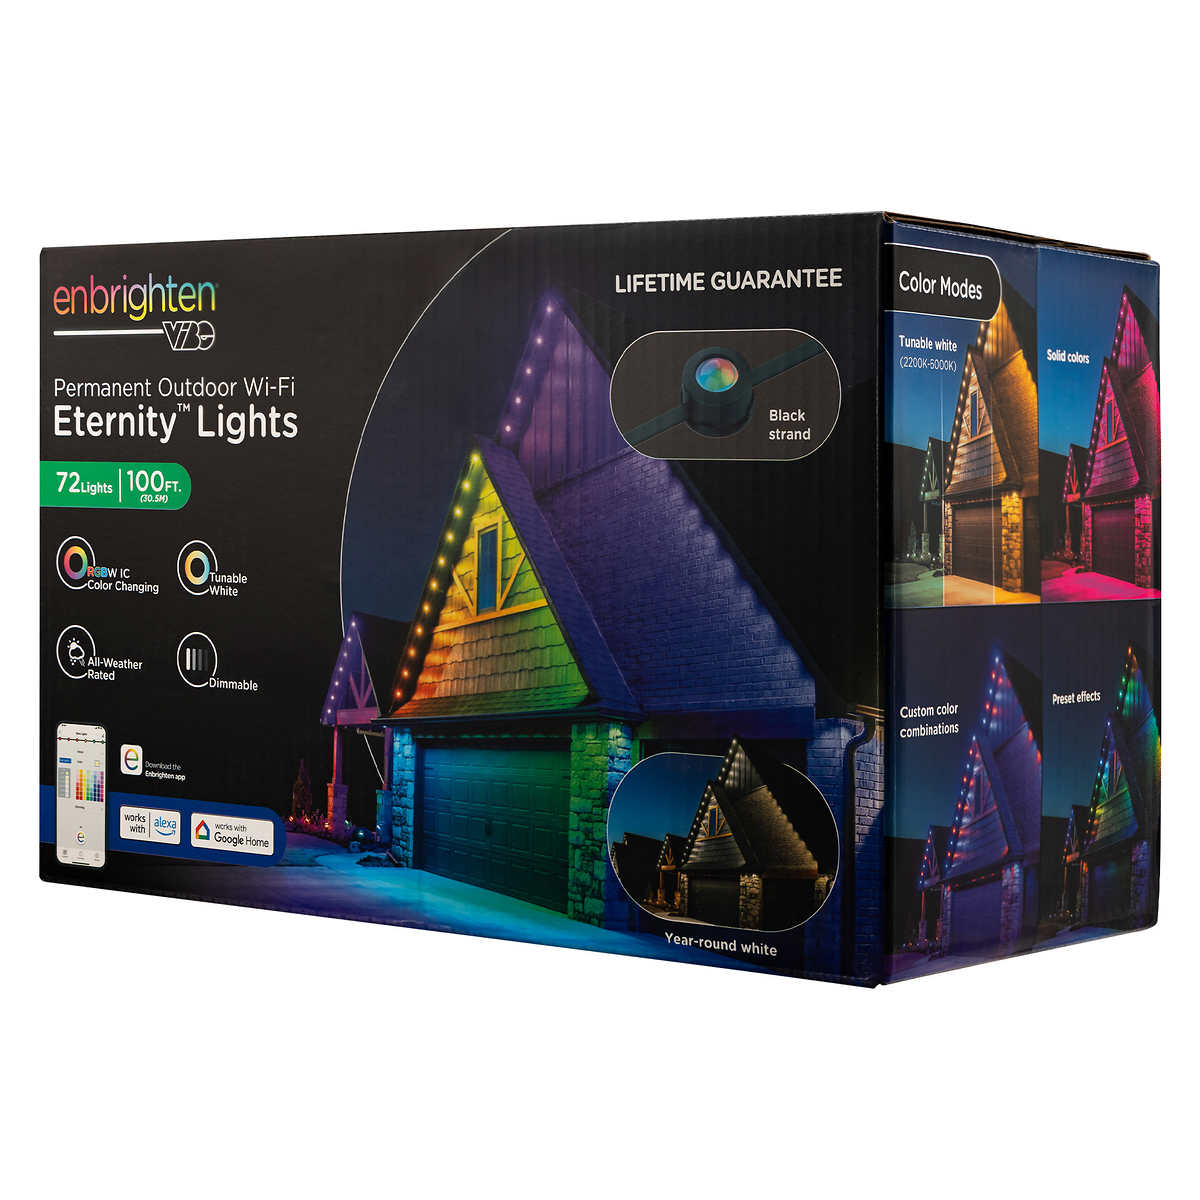 Enbrighten 100ft Outdoor Color-Changing Wi-Fi Eternity Eave Lights $159.99 @ Costco